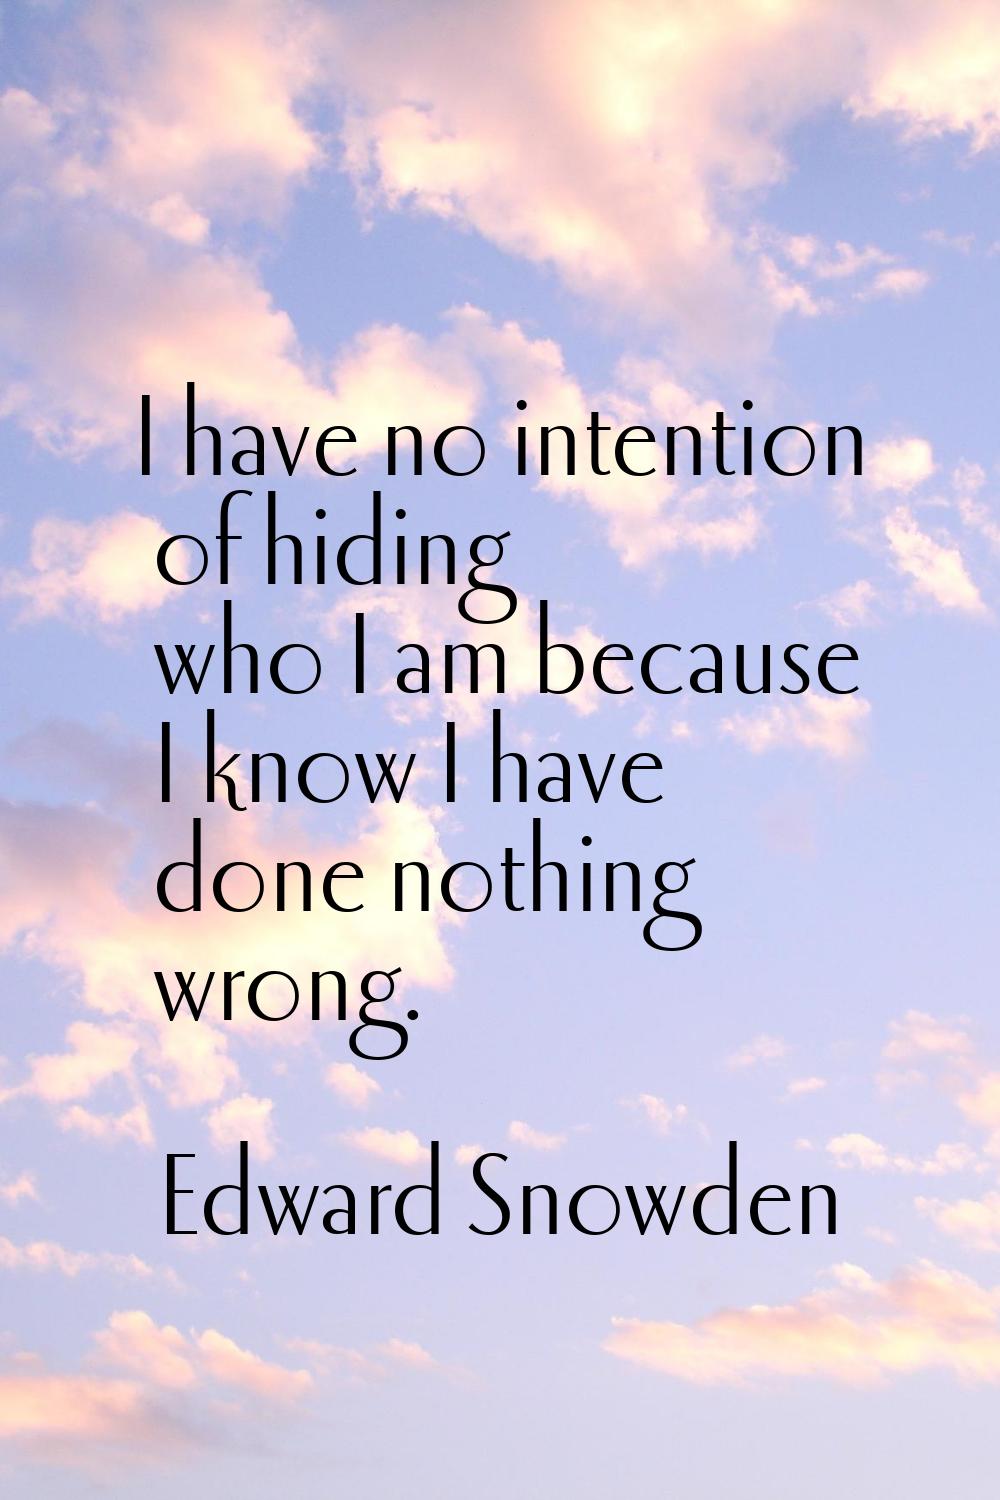 I have no intention of hiding who I am because I know I have done nothing wrong.